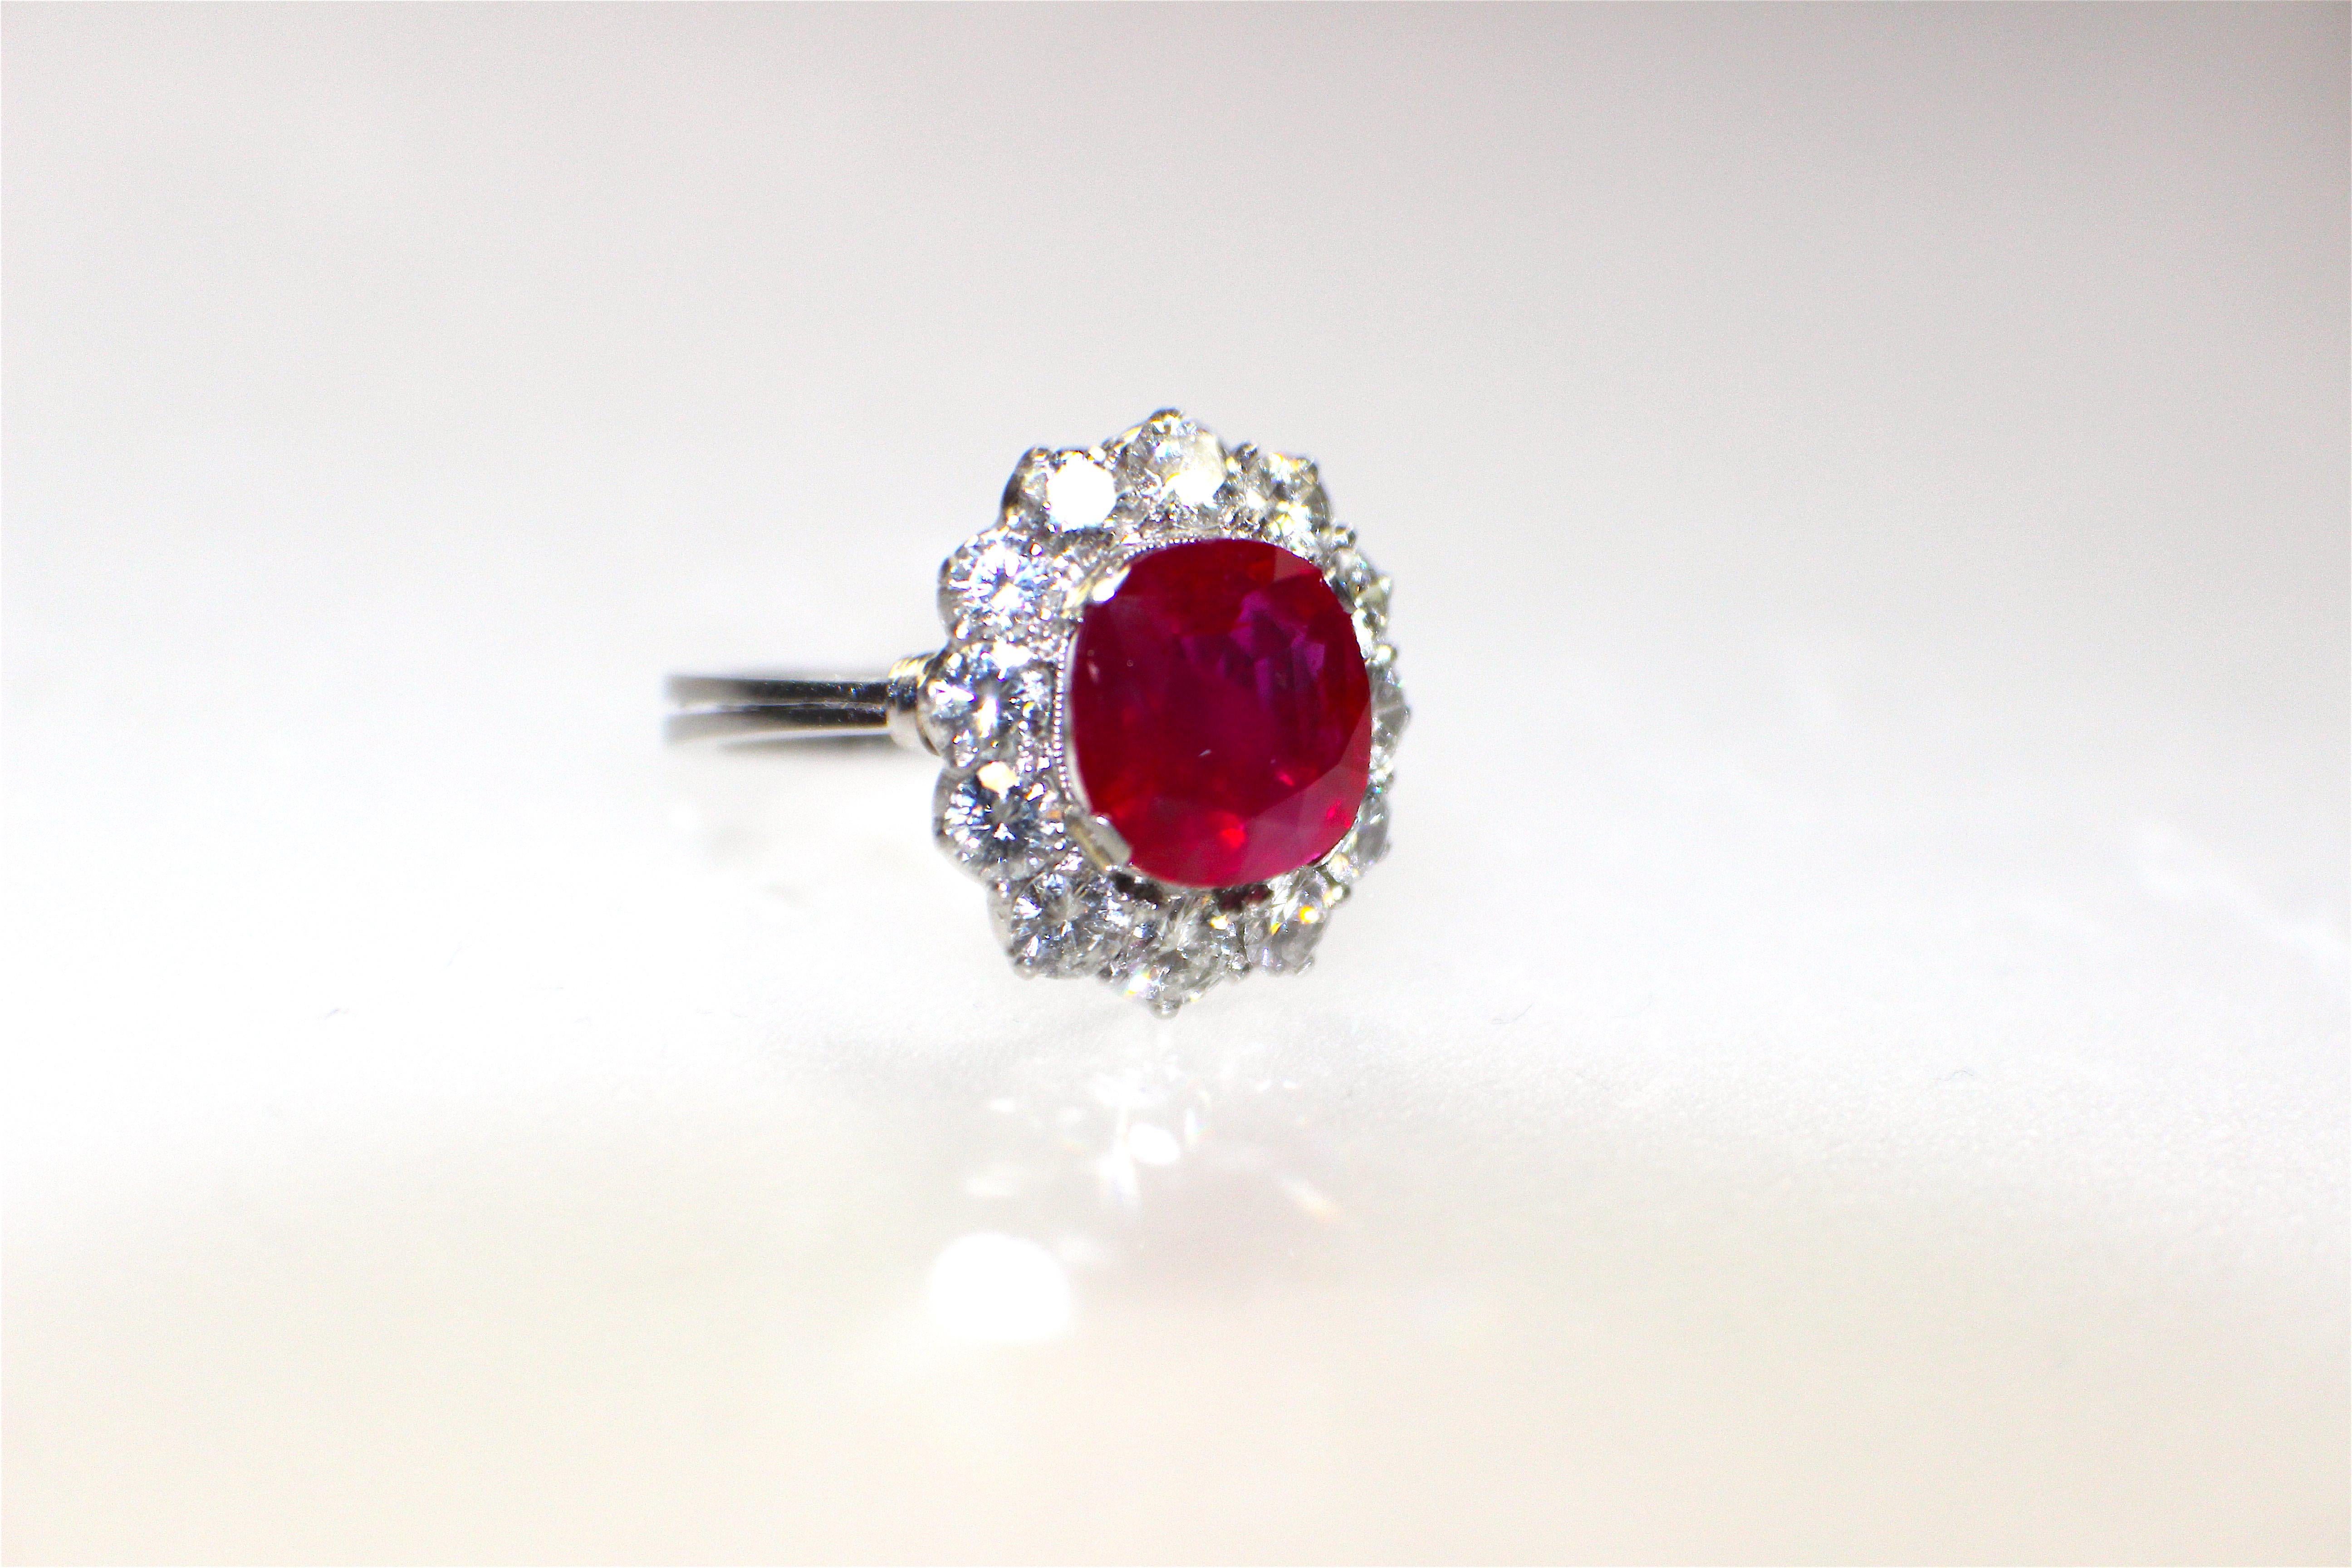 LFG certified 4,82ct natural no heat ruby and diamond ring  ca. 1910. set in platinum 